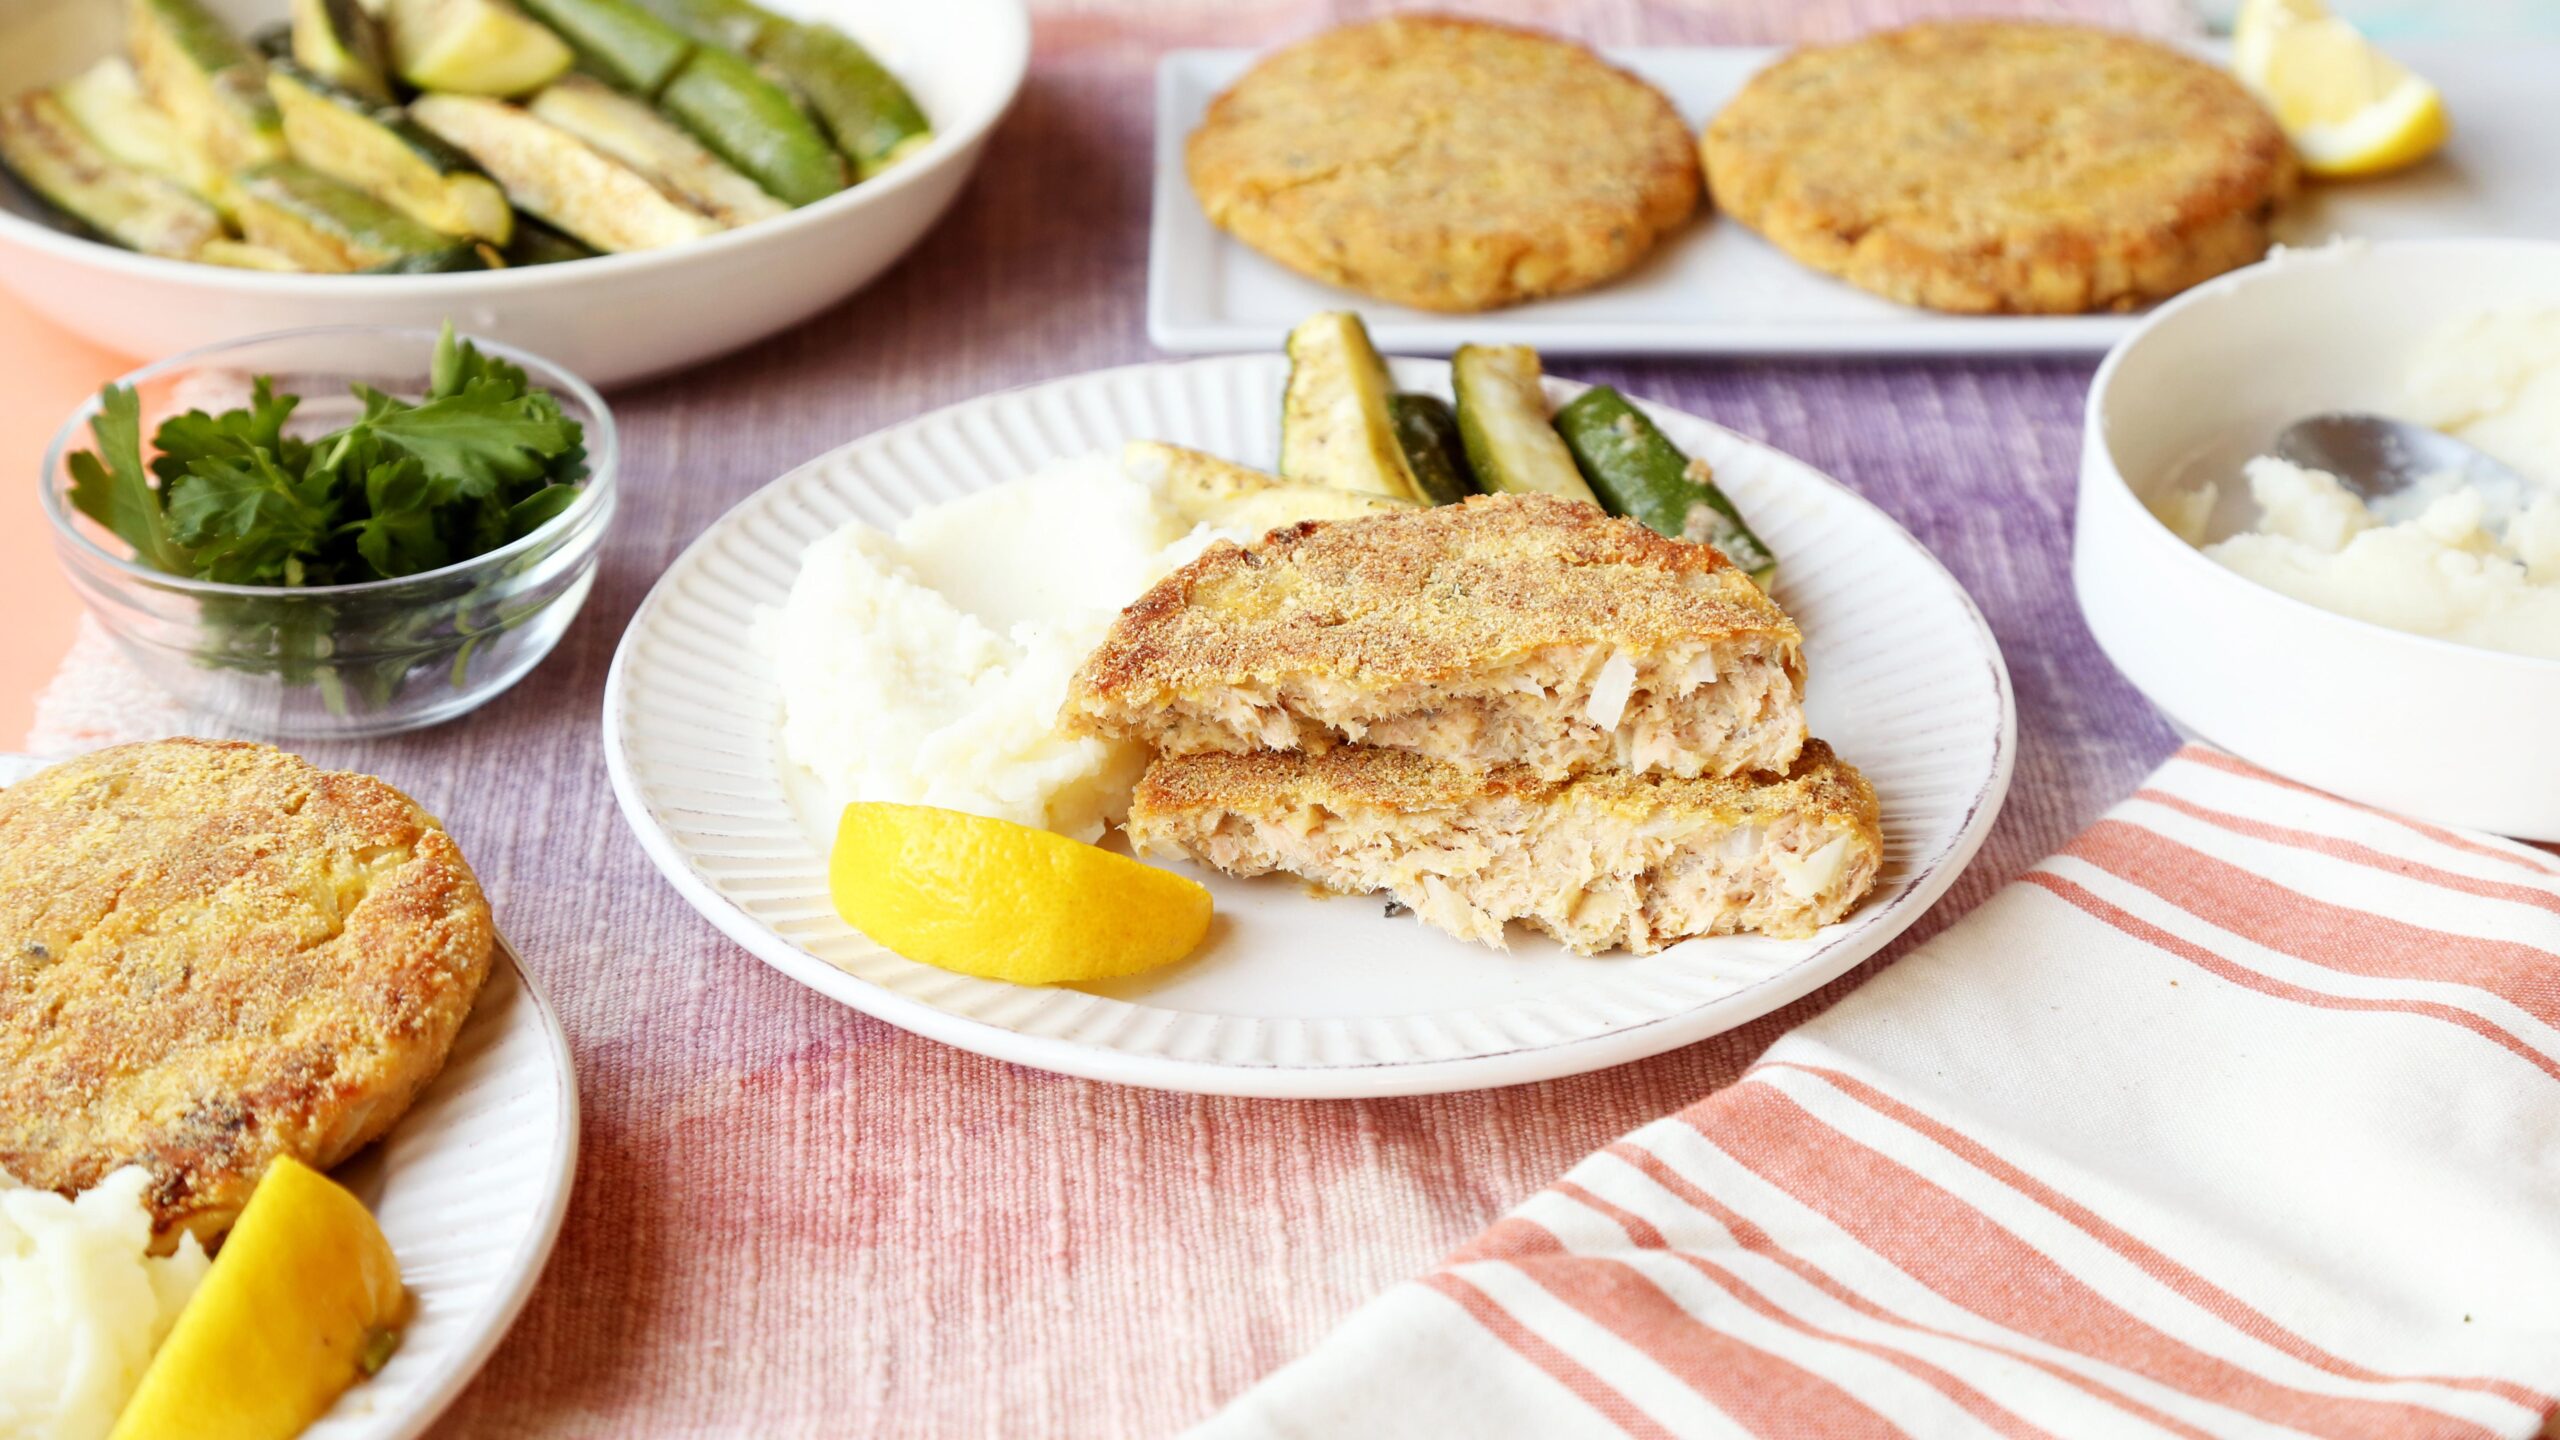  These salmon patties are the real catch of the day!